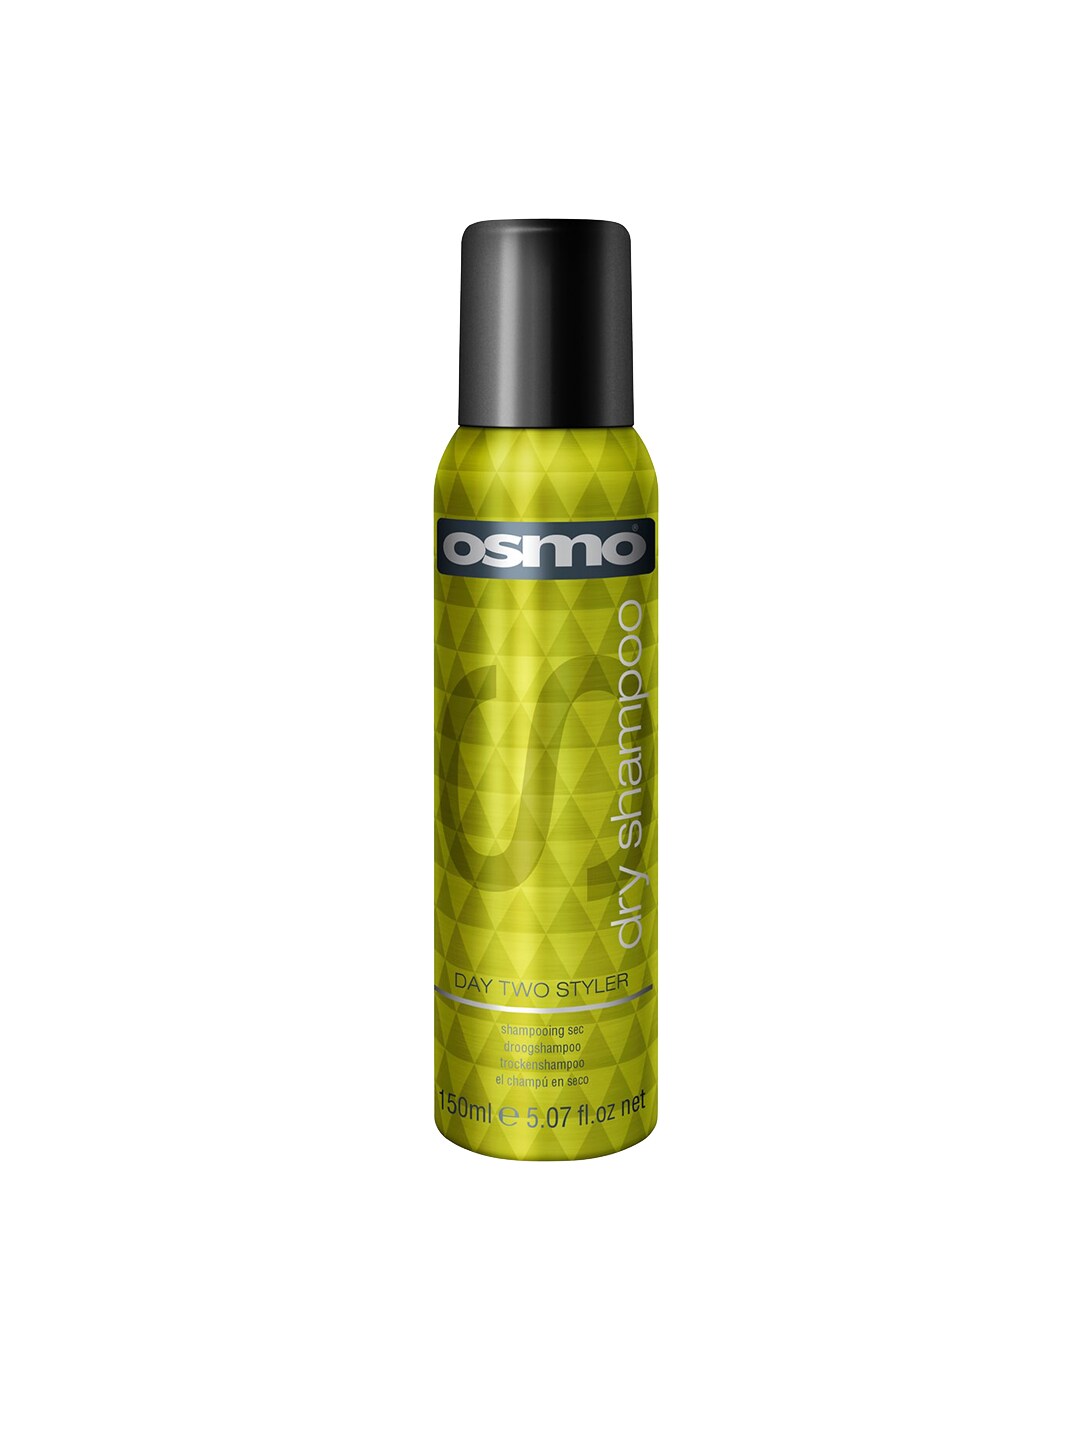 osmo Day Two Styler Dry Shampoo for All Hair Types - 150 ml Price in India